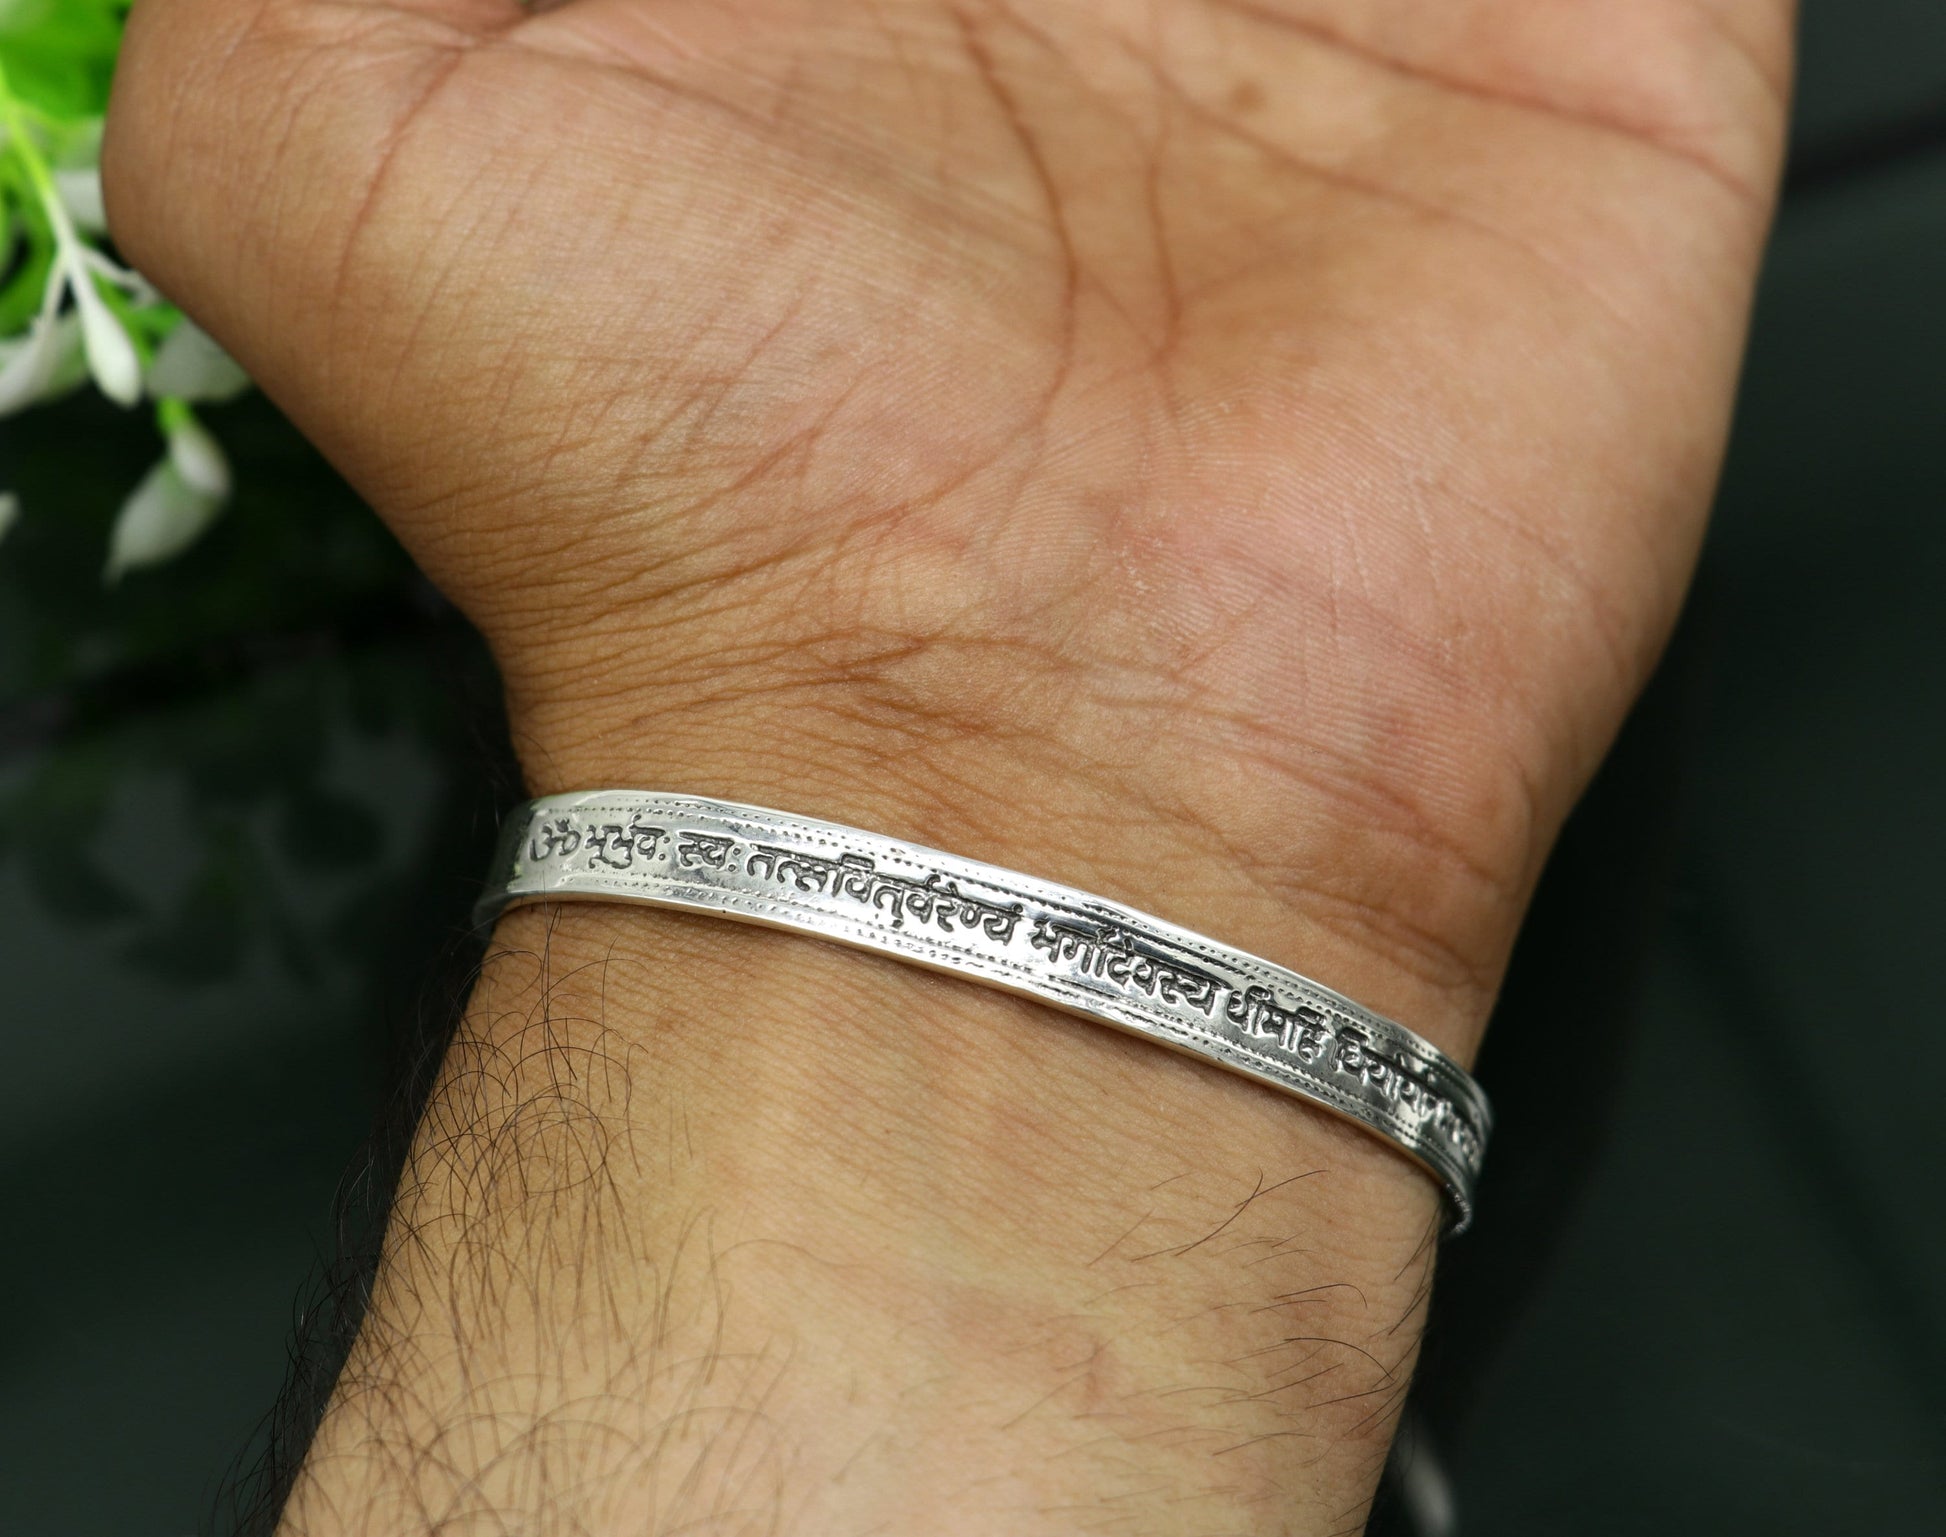 Authentic 925 sterling silver customized Gayatri Mantra design cuff kada bracelet, easy to adjust with your wrist, unisex jewelry cuff45 - TRIBAL ORNAMENTS